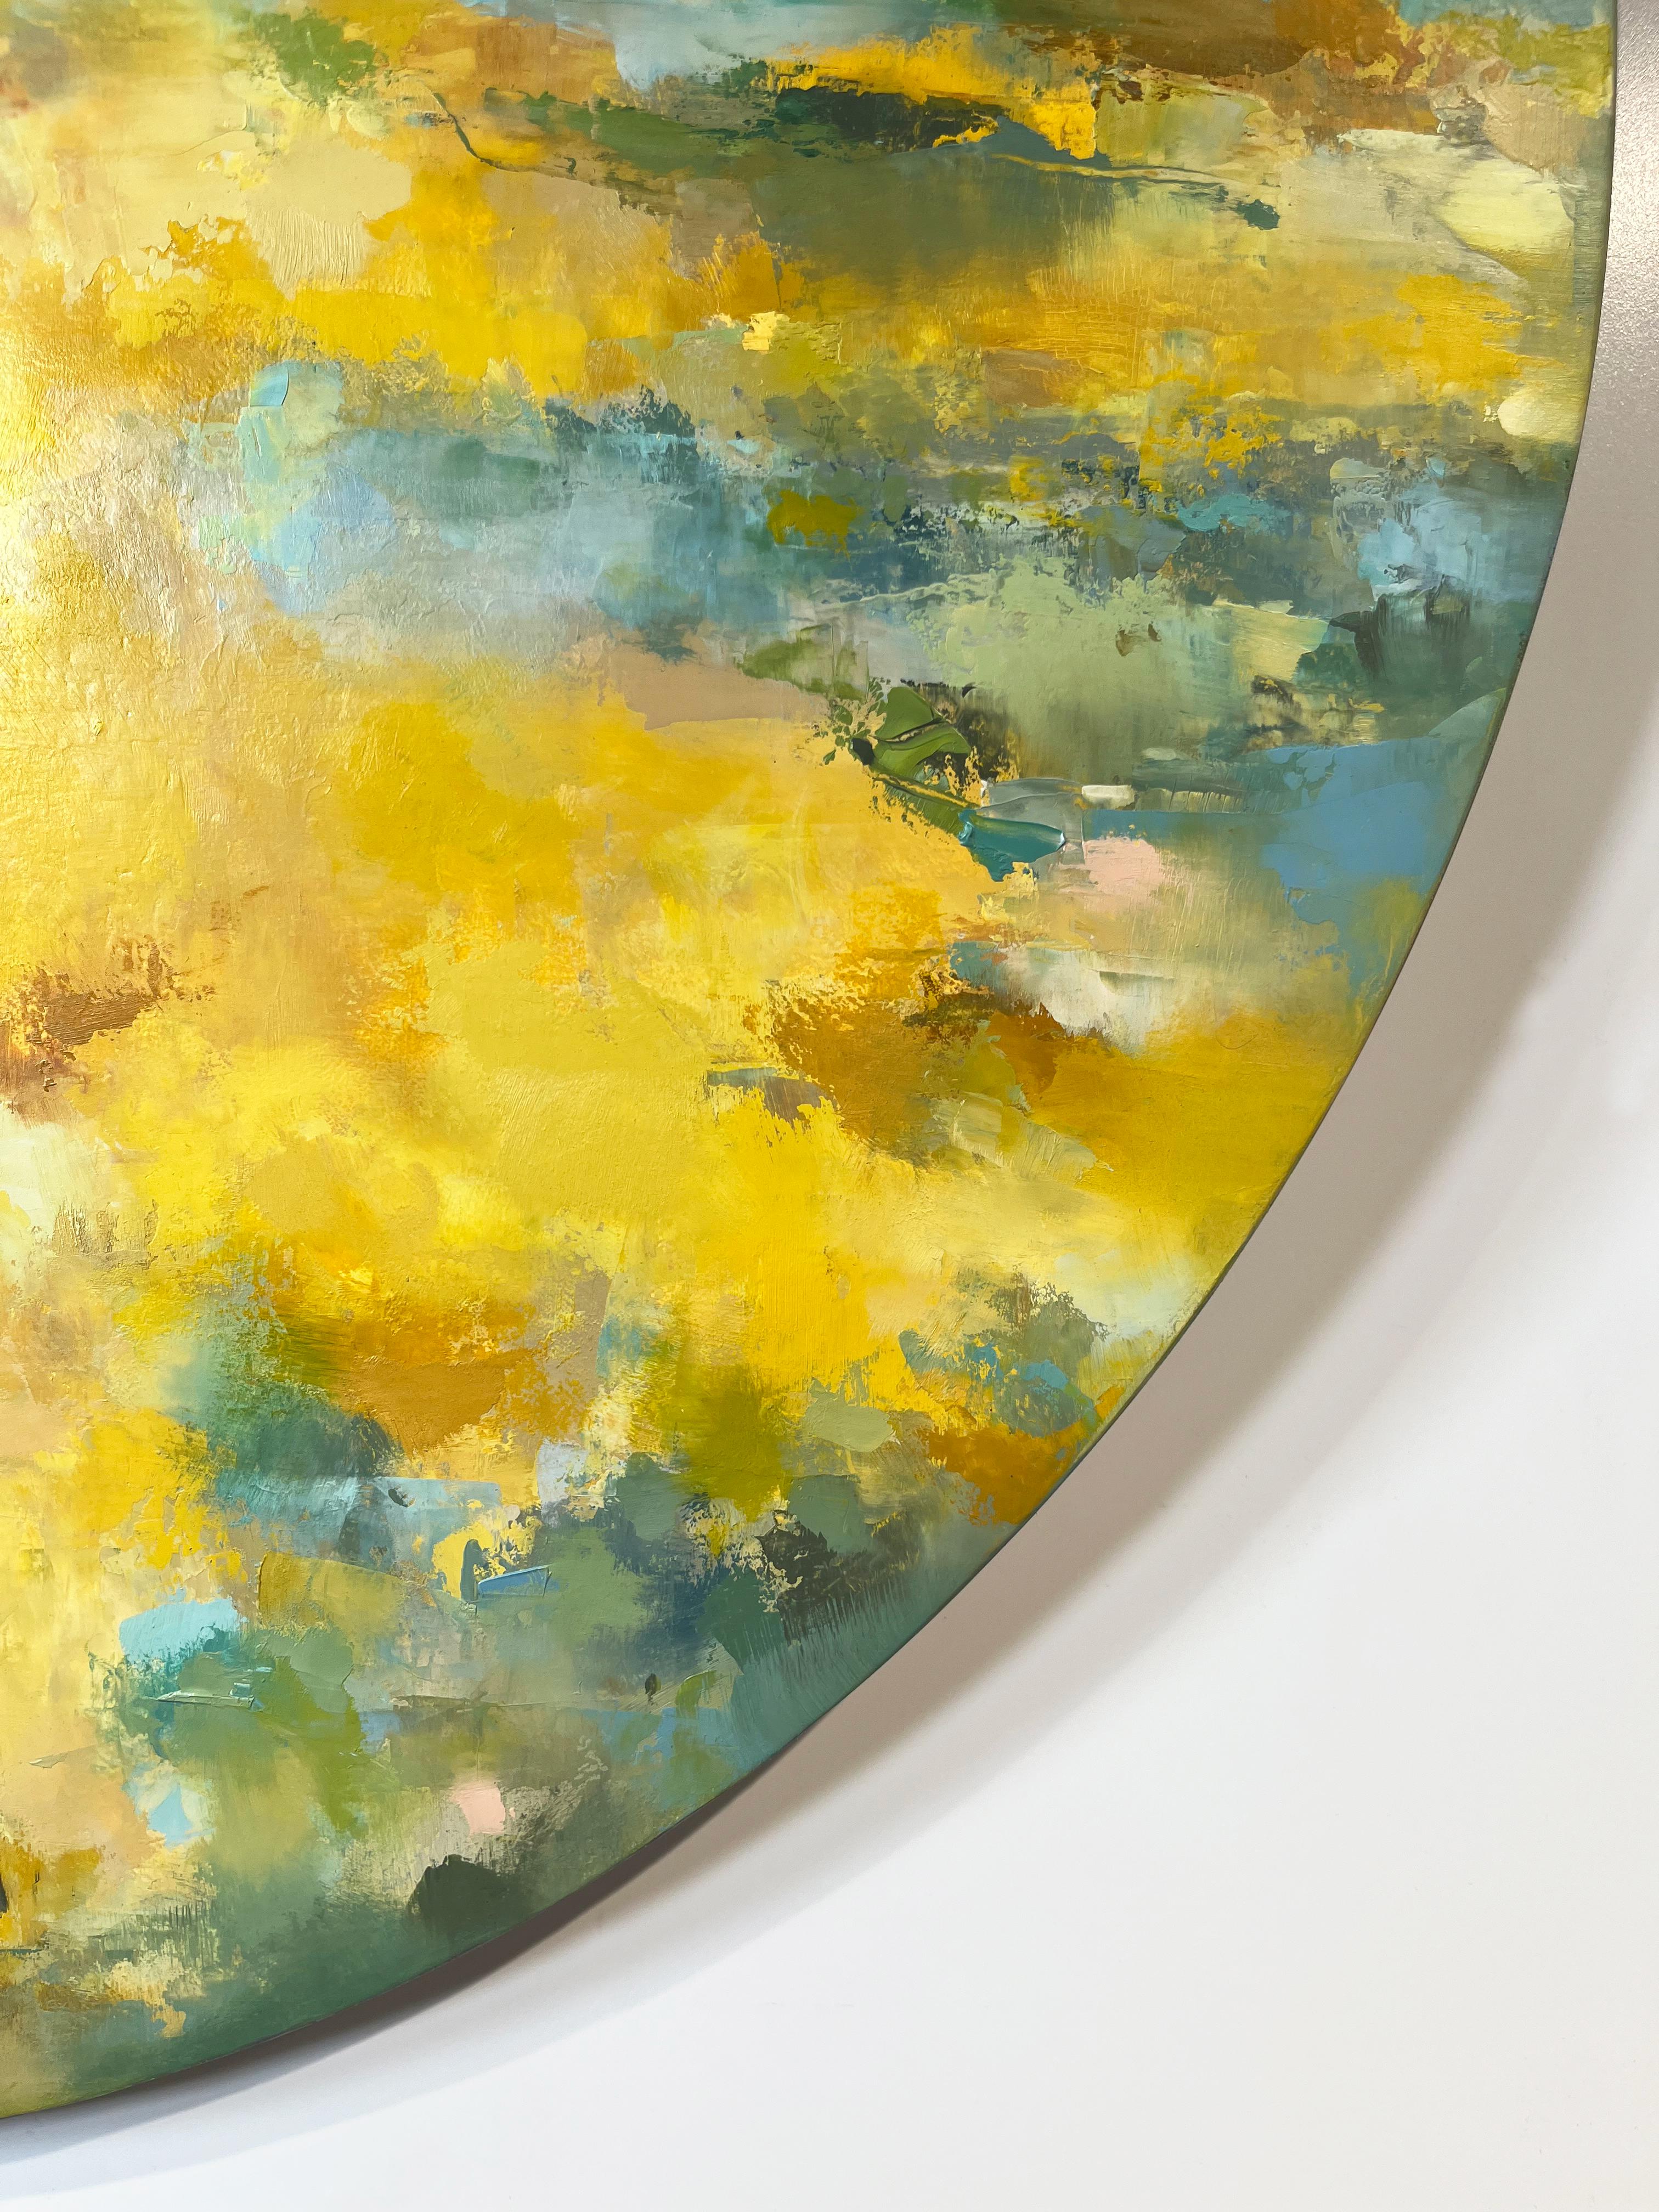 Walk in the Forest is a beautiful, bold and vibrant oil and cold wax painting on circular panel by Canadian-Bolivian artist Tamara Soto. 

Cold wax painting blurs the line between oil painting and the more well known encaustic painting. Cold wax